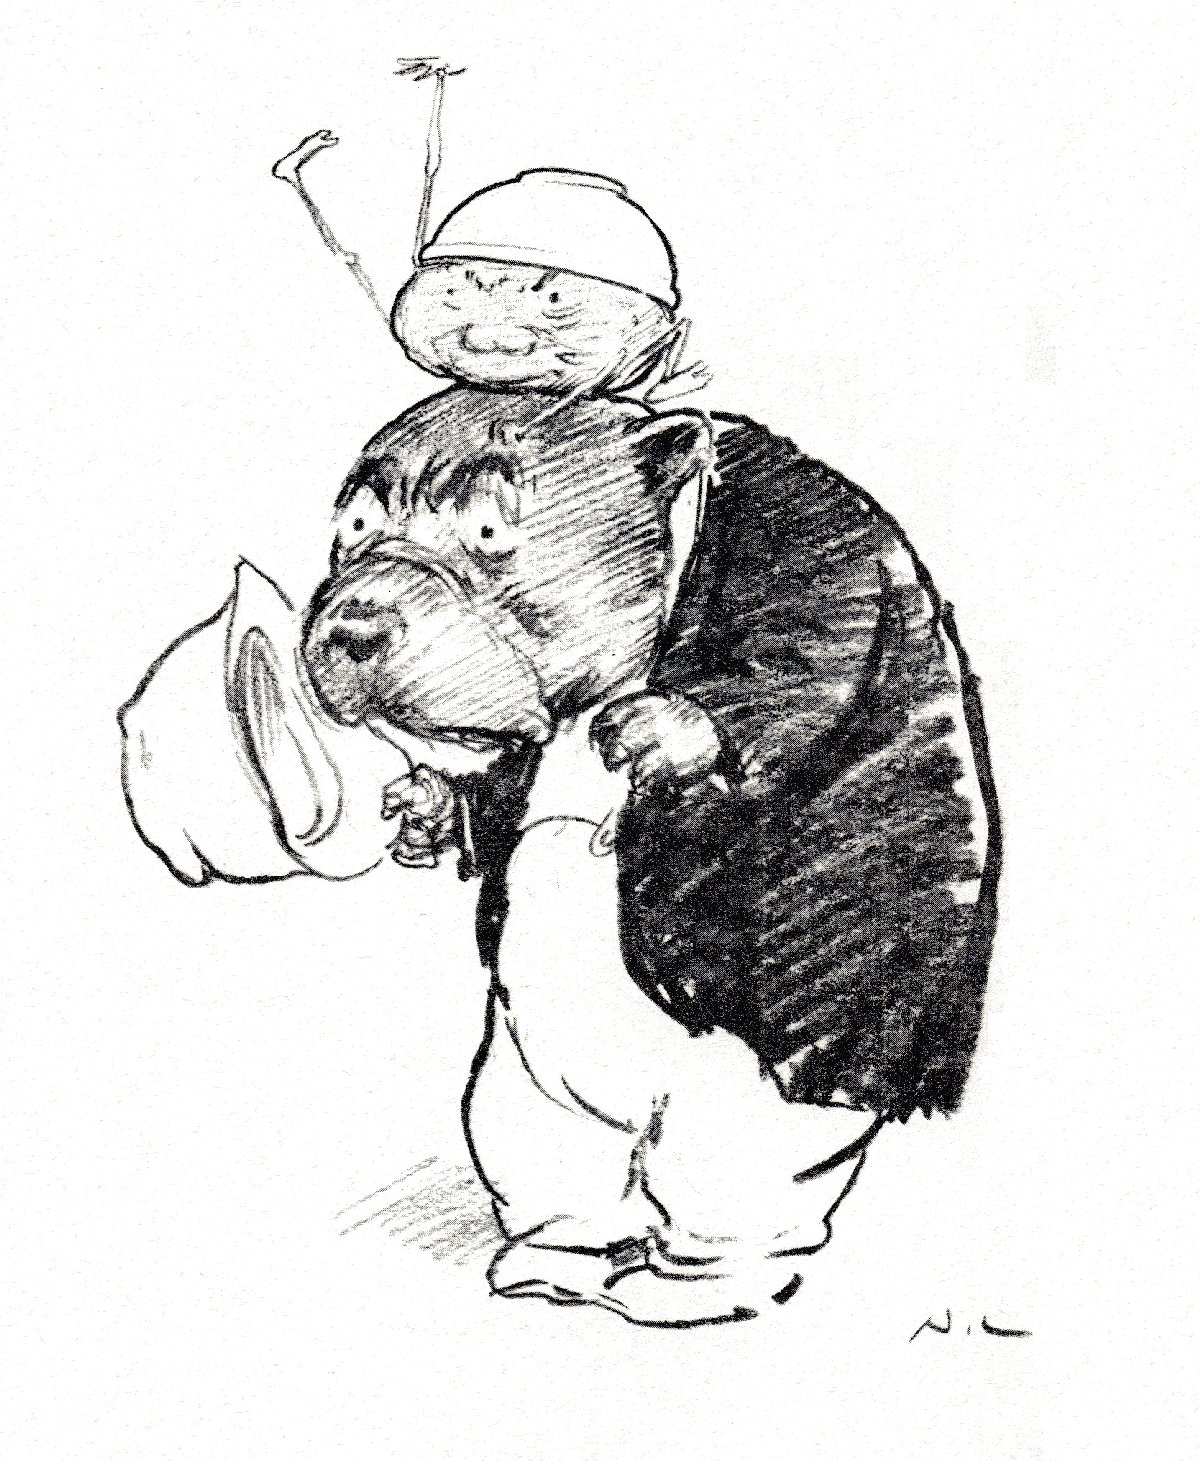 cartoon figures : pudding with stick appendages on wombat's head